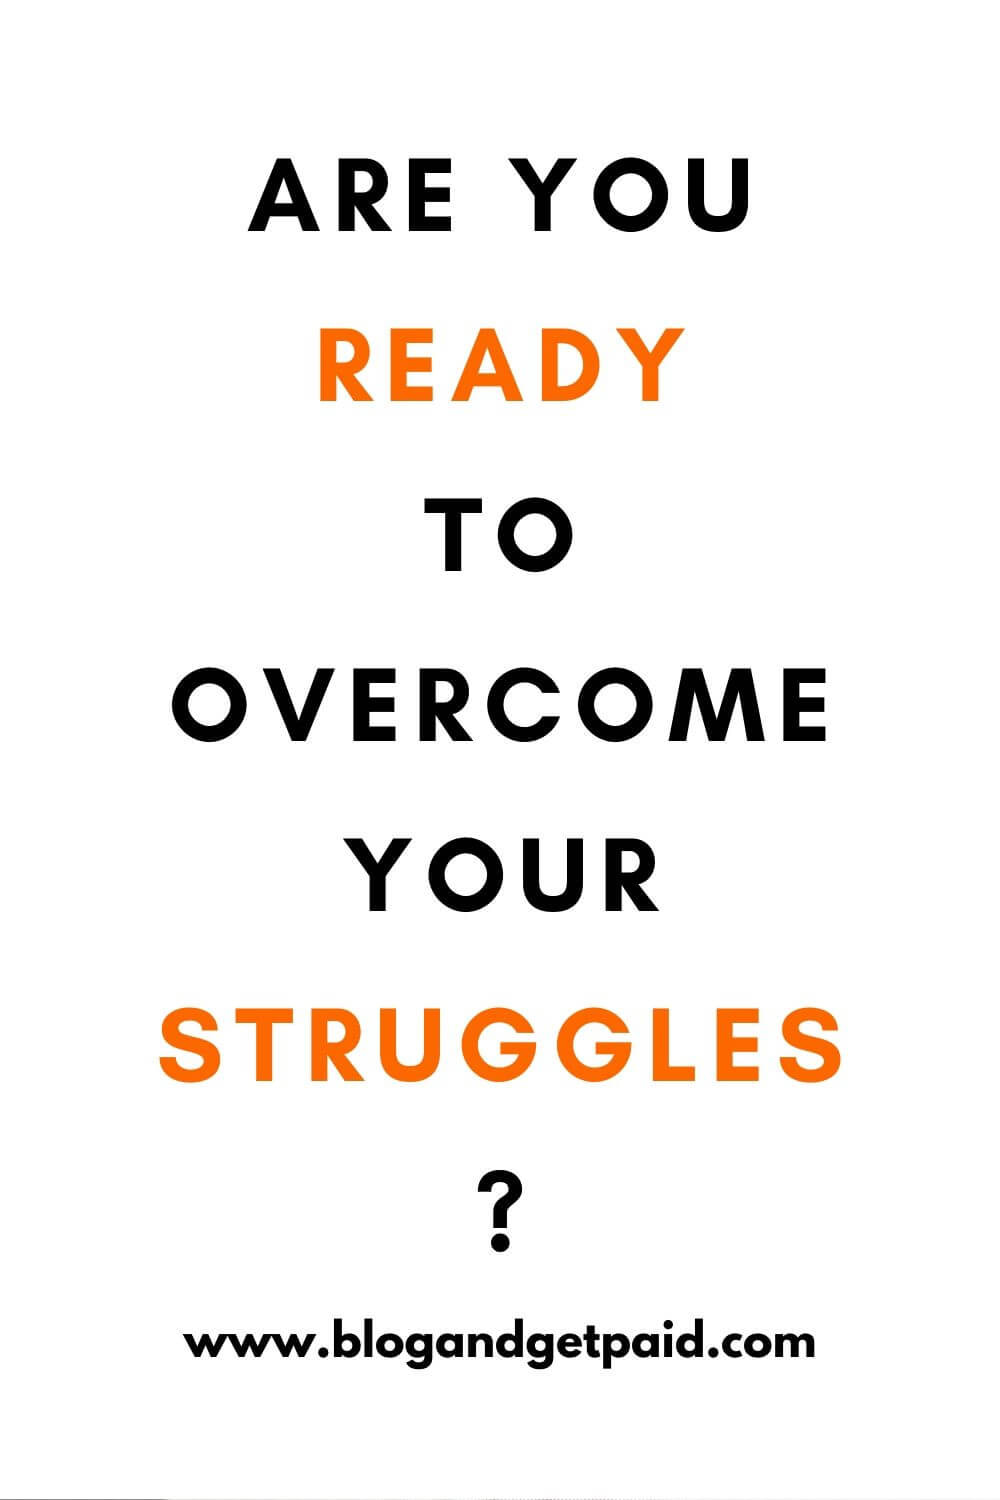 7 Keys That May Help You Overcome Your Struggles